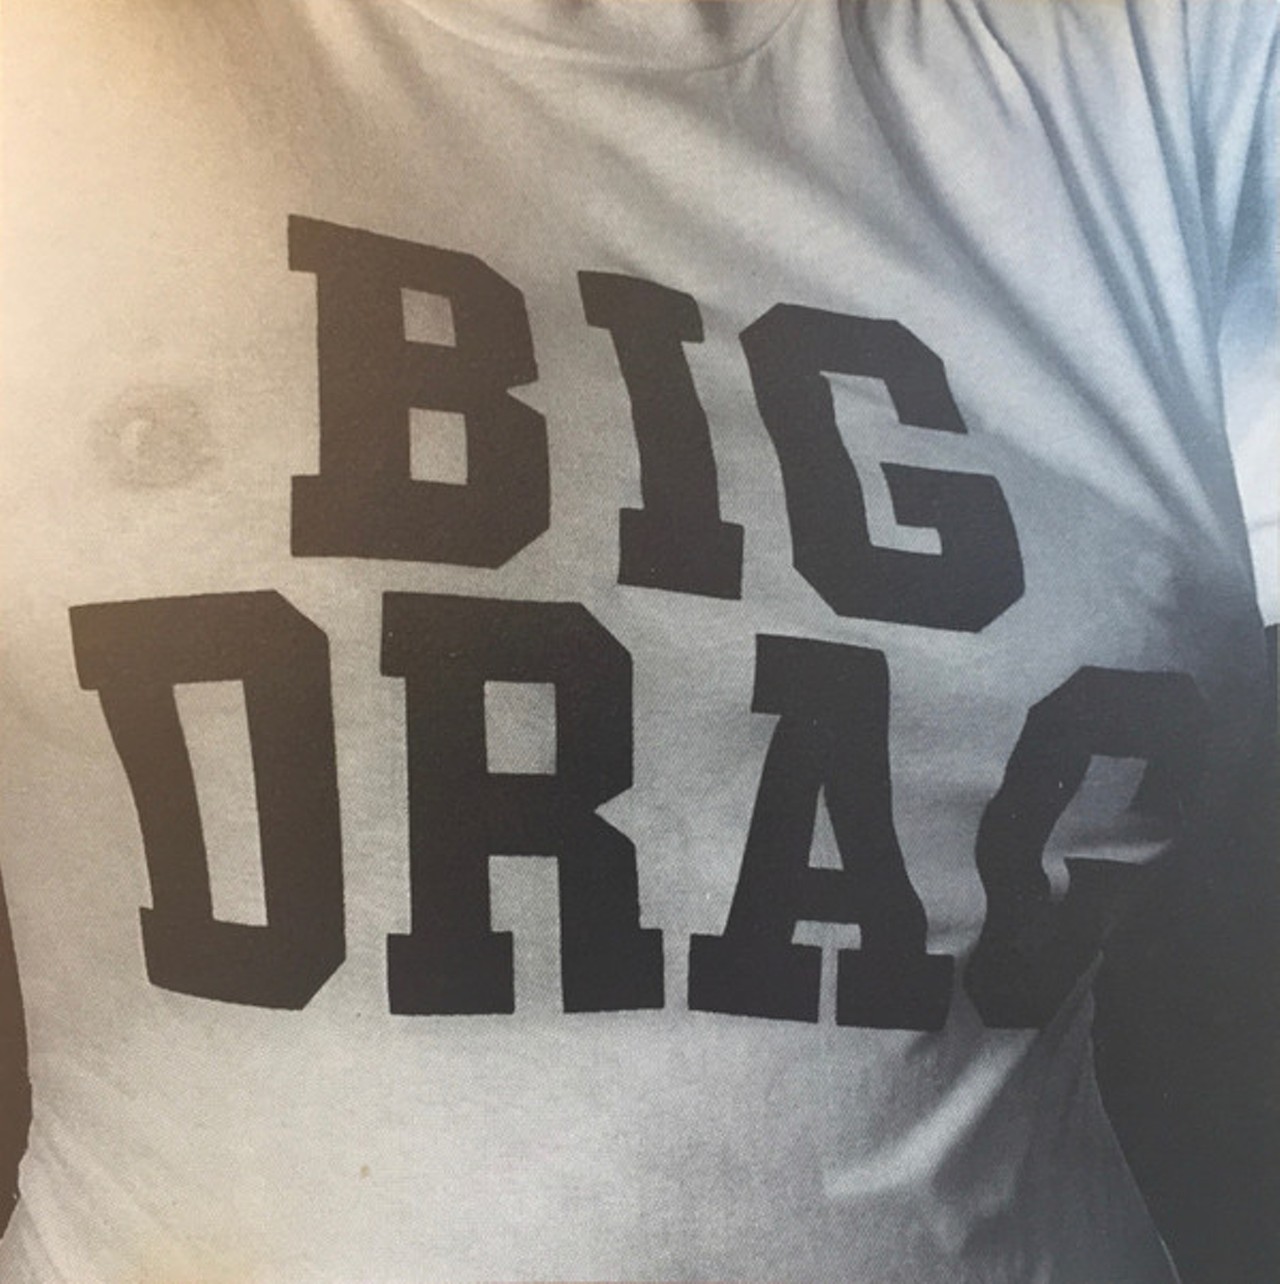 Big Drag: "Big Drag"
This mid-'90s release by a San Antonio trio that jumped from being Taco Land mainstays into a regional phenom captures everything that made it a crowd favorite: a dance-ready backbeat. fuzz-drenched guitars, laconic vocals and hooks that just won't quit.
Photo via Only Boy